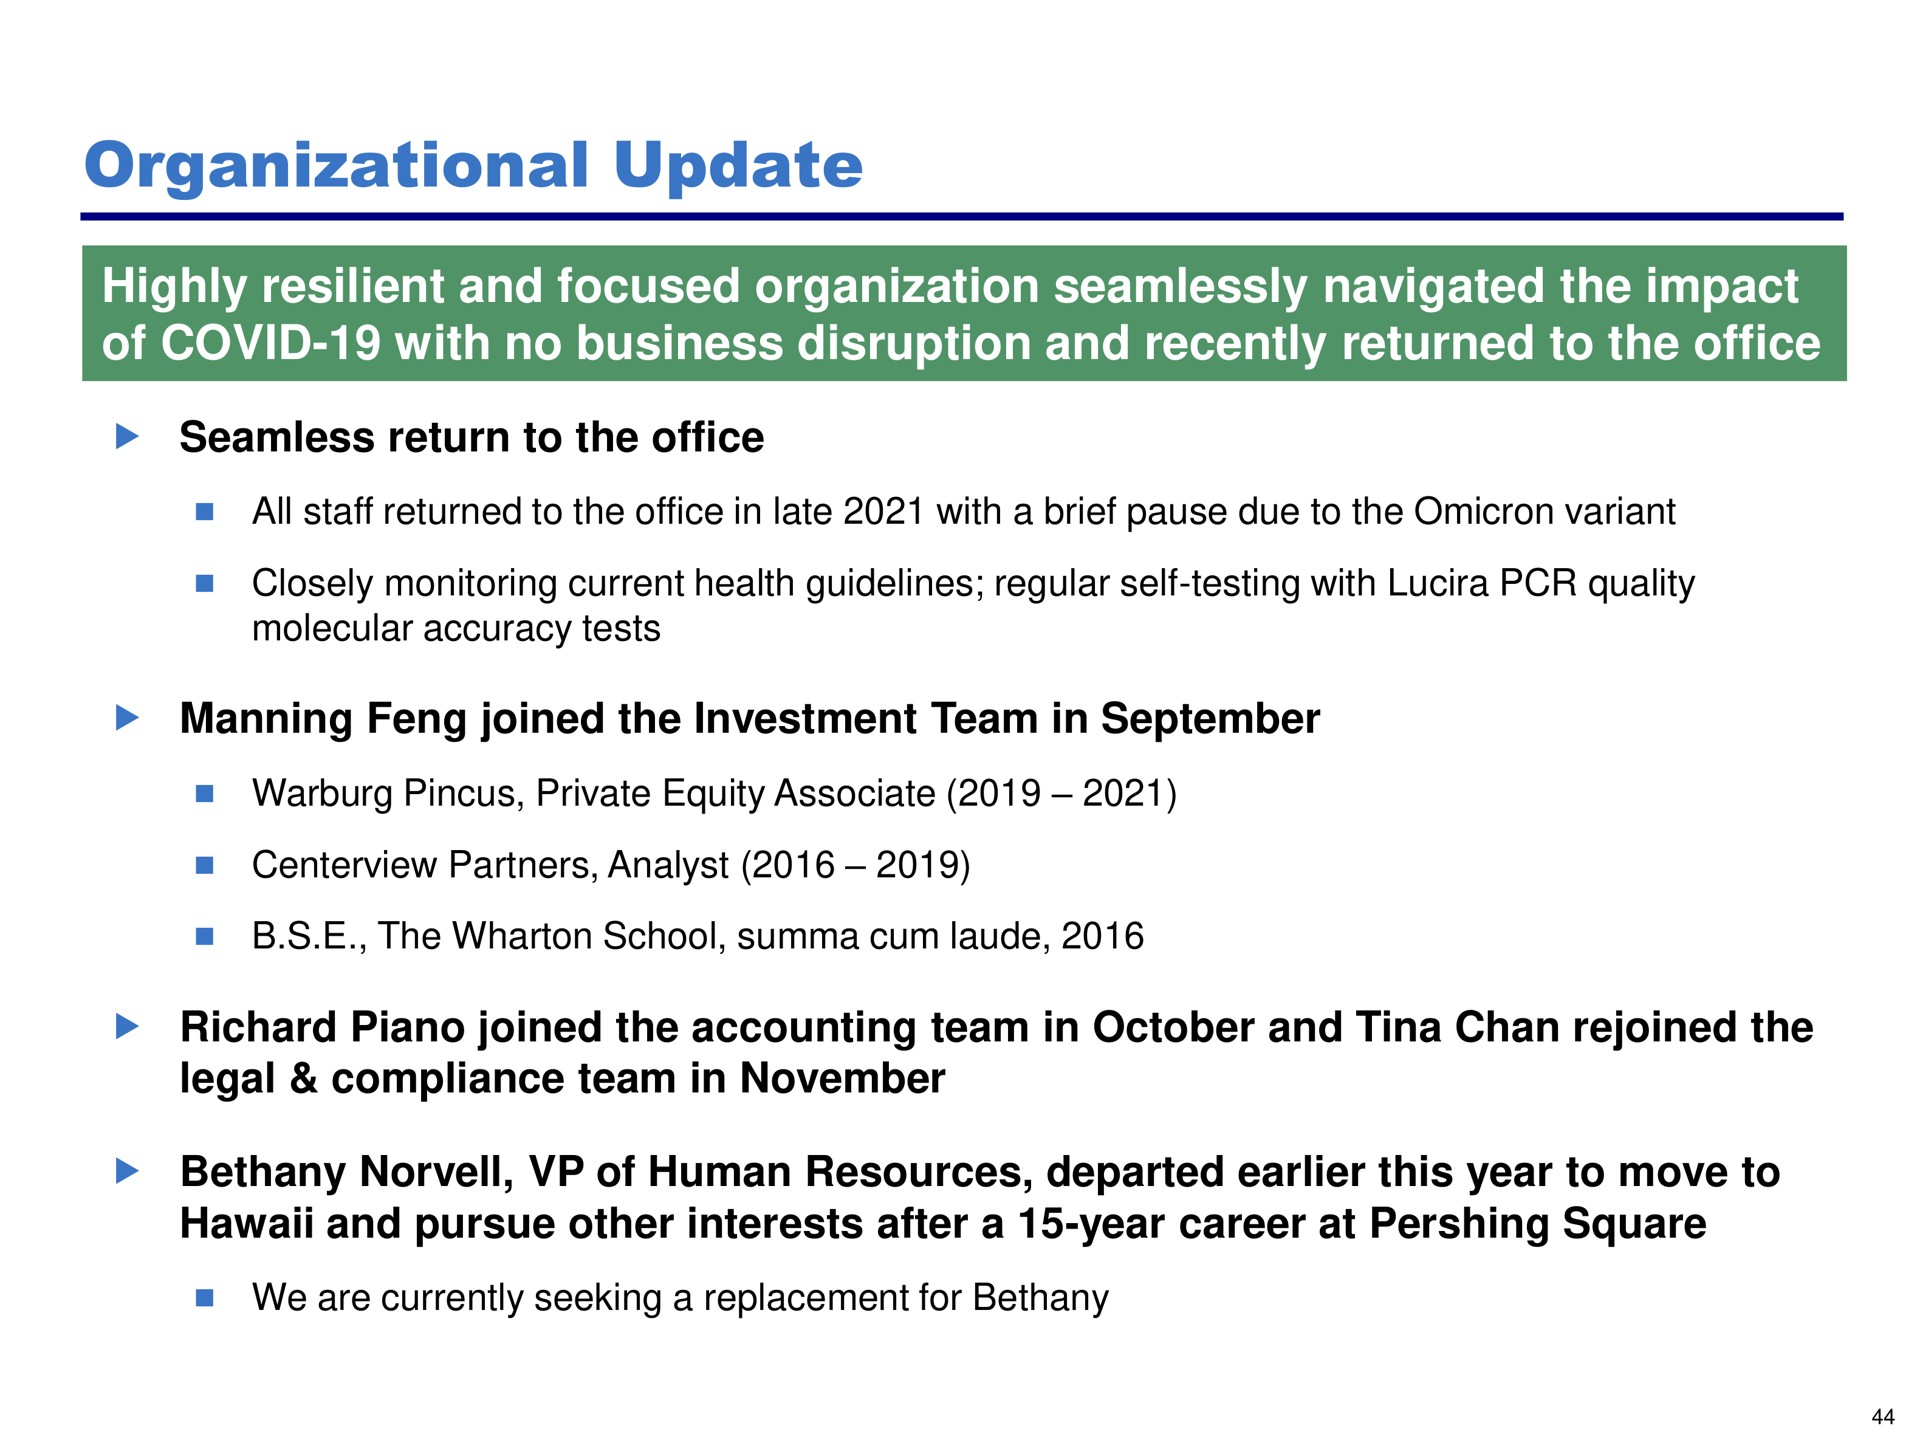 organizational update highly resilient and focused organization seamlessly navigated the impact of covid with no business disruption and recently returned to the office | Pershing Square